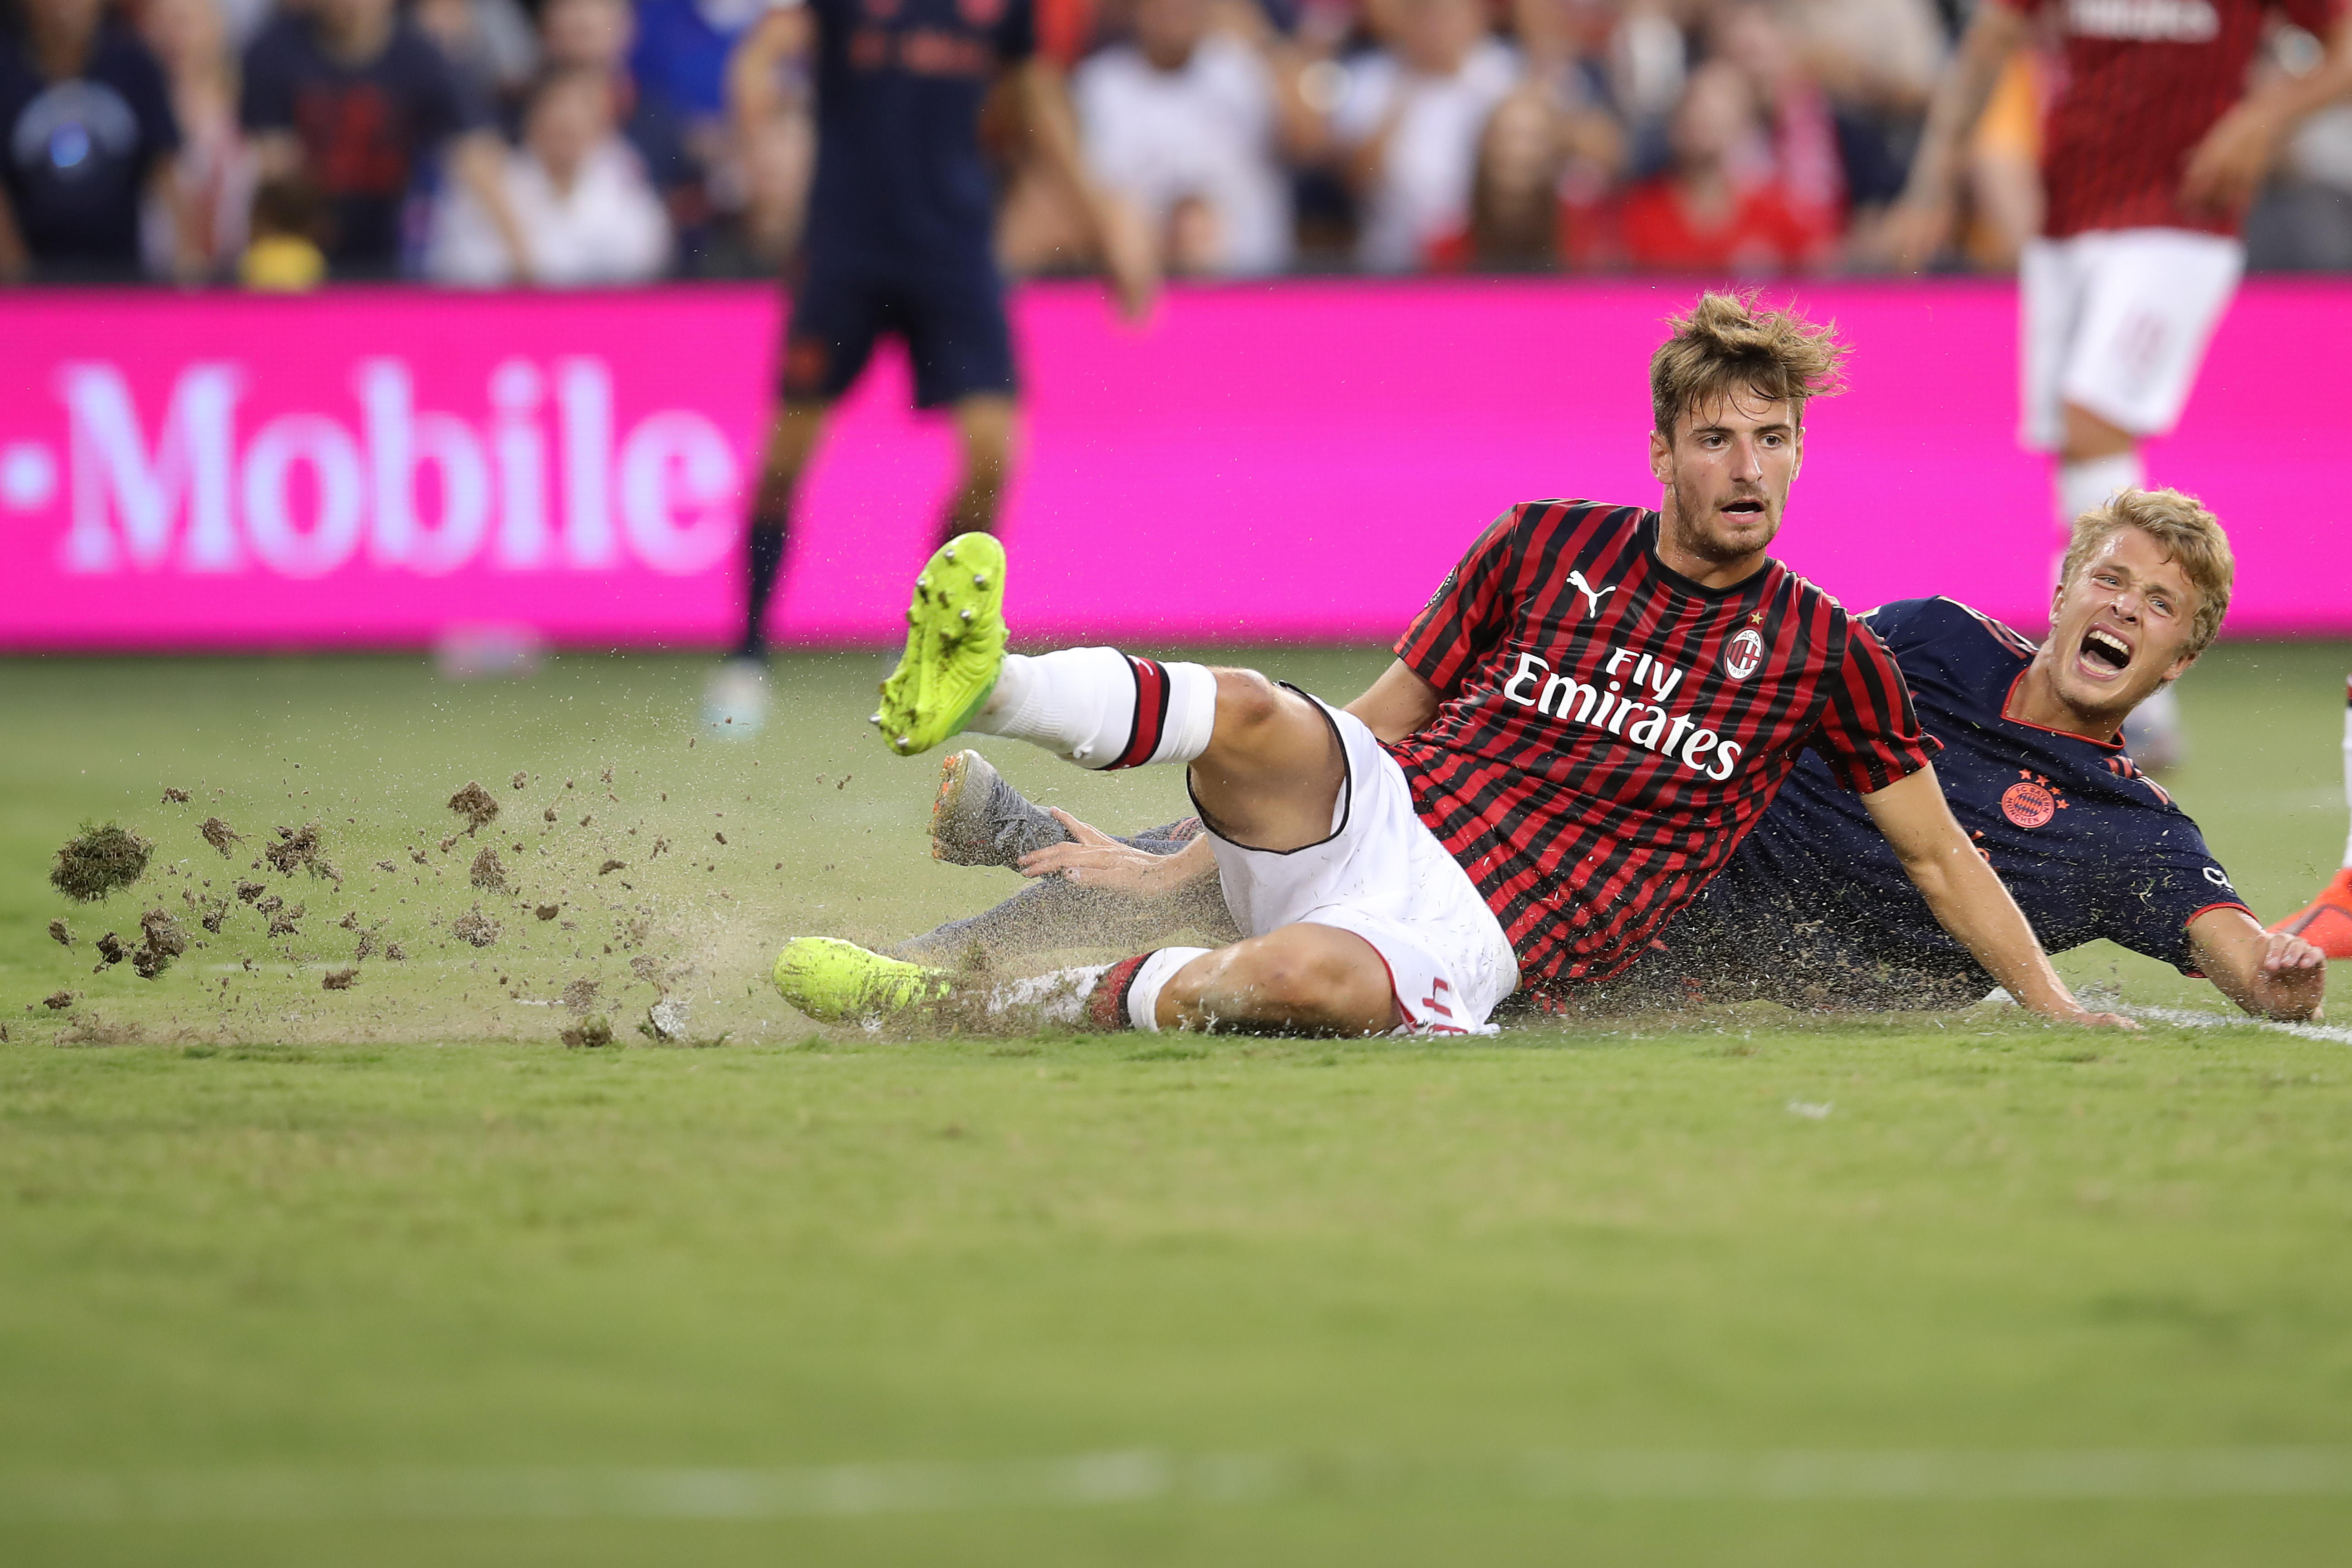 KANSAS CITY, MISSOURI - JULY 23: Fiete Arp of FC Bayern Muenchen battles for the ball with Matteo Gabbia of AC Milan during the 2019 International Champions Cup match between FC Bayern and AC Milan at Children`s Mercy Park Stadium on July 23, 2019 in Kansas City, Missouri. (Photo by Alexander Hassenstein/Bongarts/Getty Images)